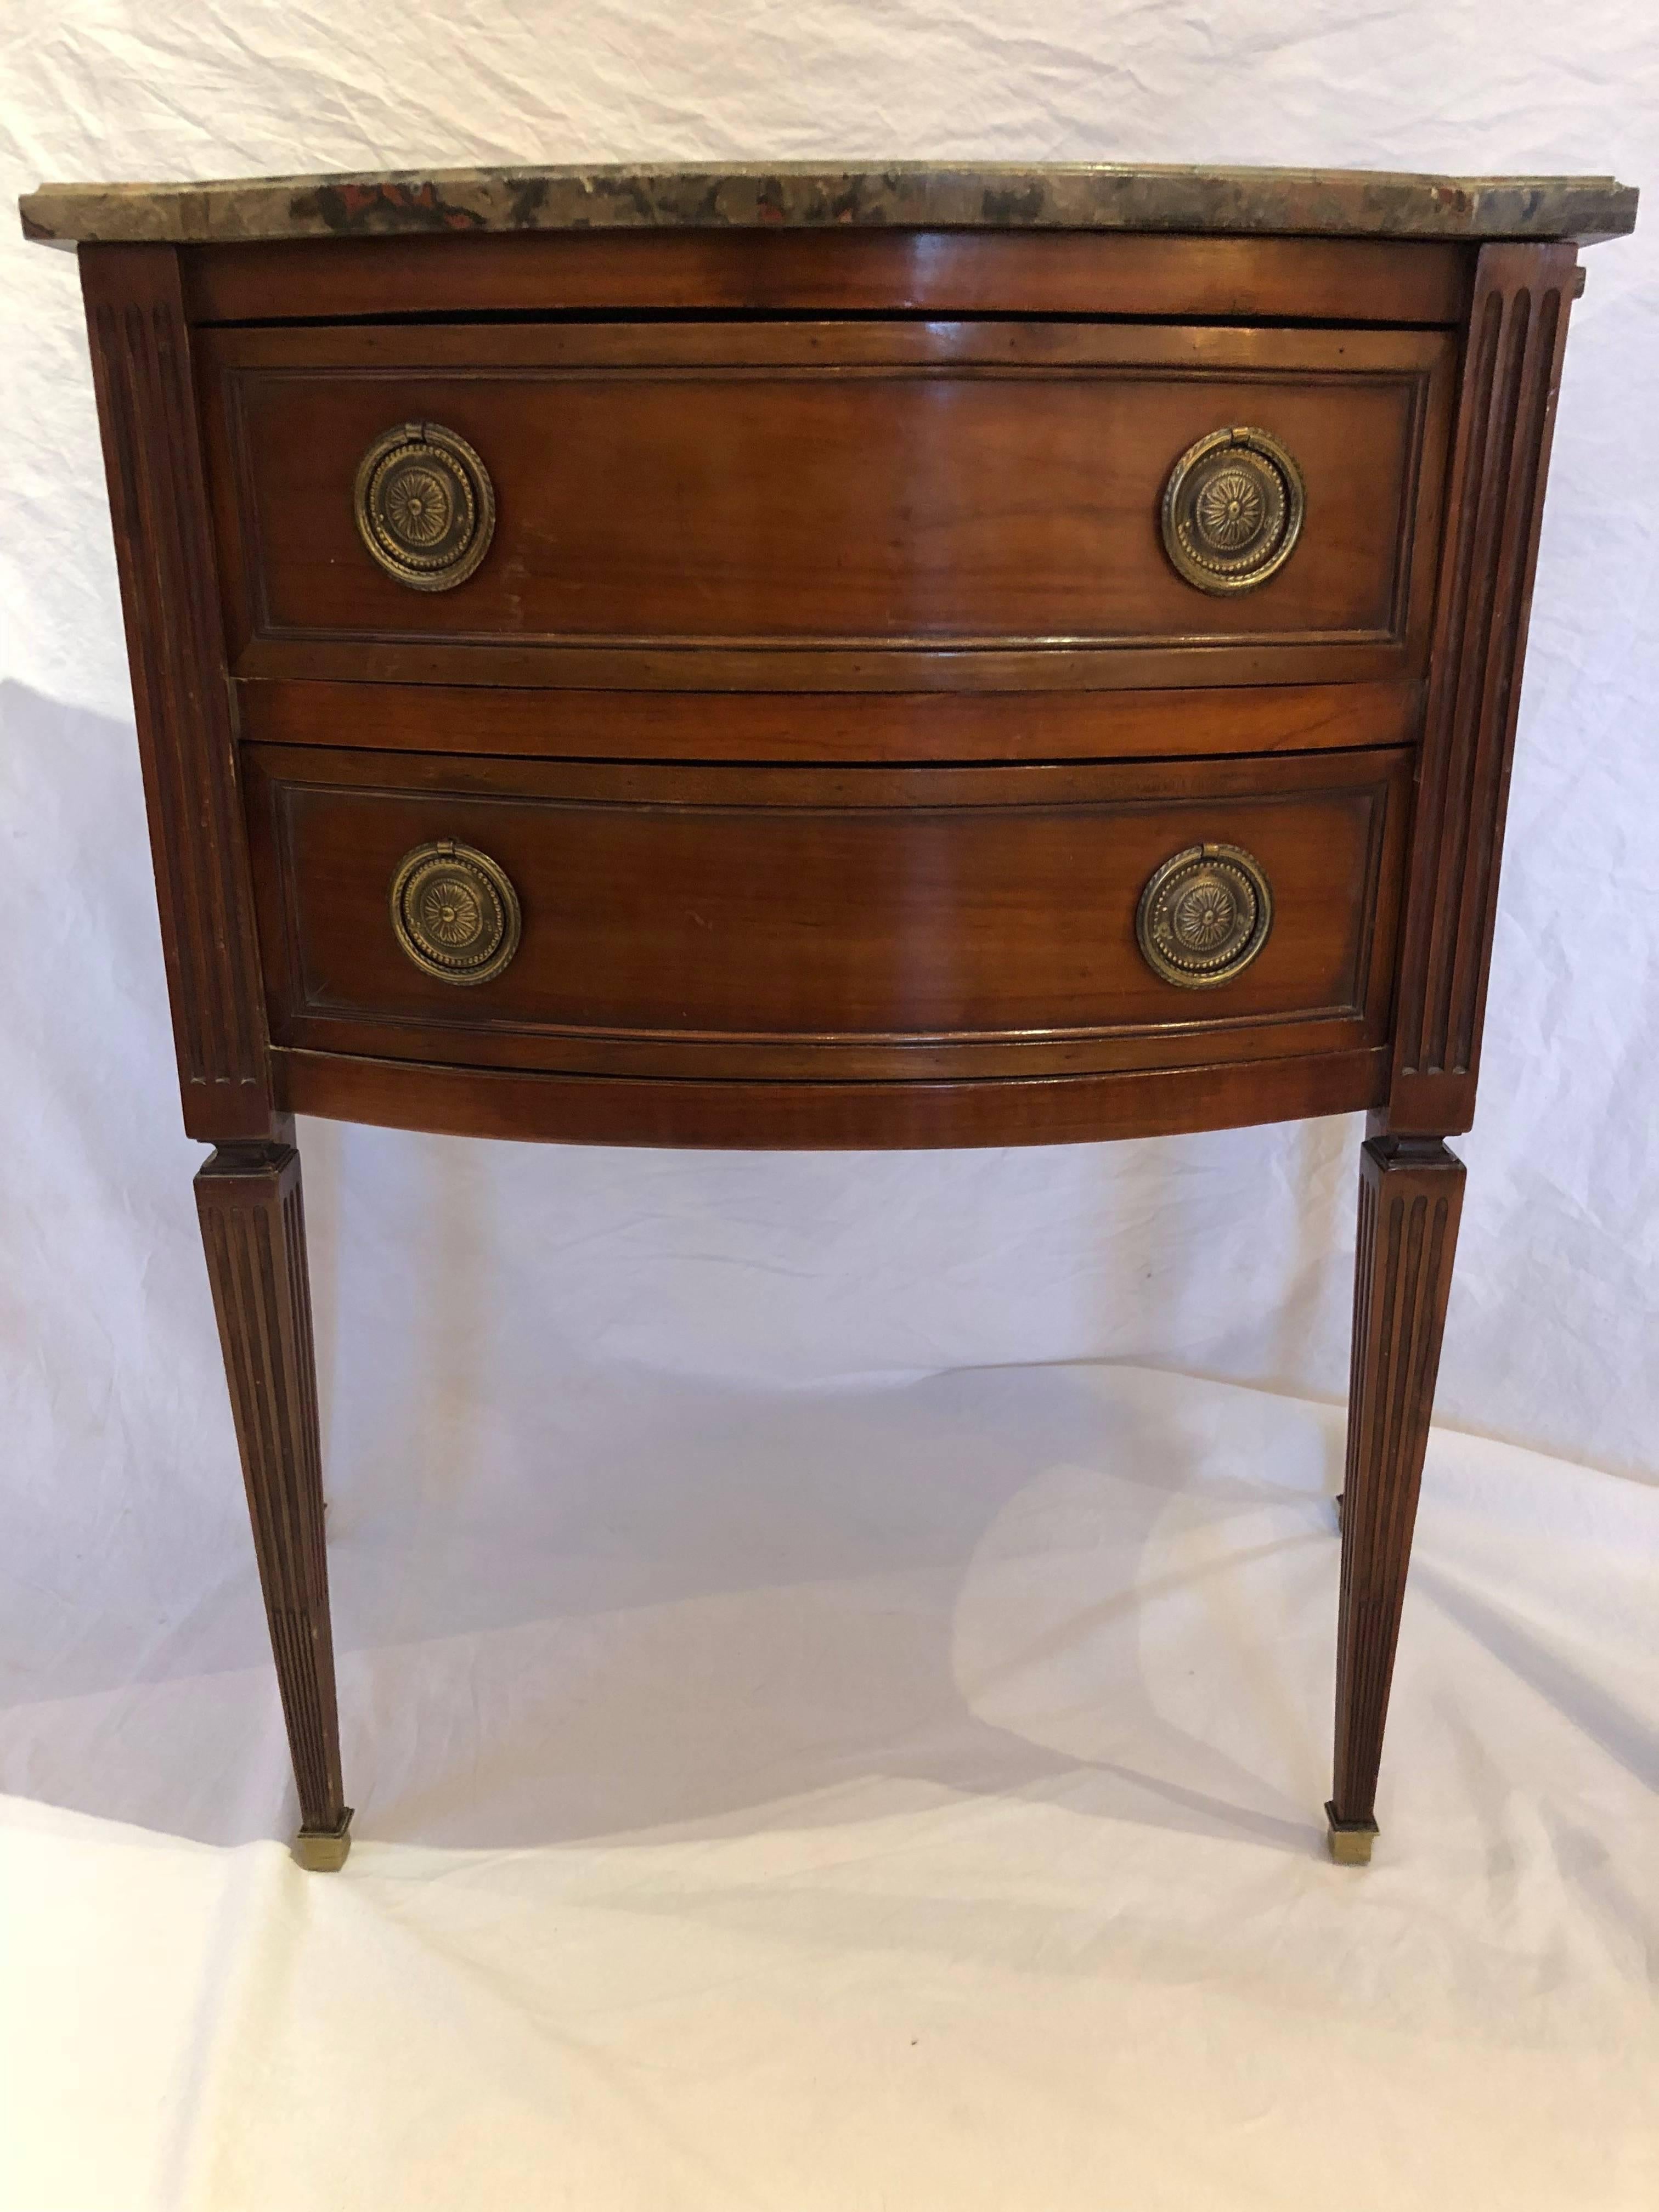 Handsome small commode with fluted legs, brass capped feet and a grey, tan, red marble top in original honed finish. The size is nice being larger than typical side table but smaller than a full sideboard or commode. 

Early 19th century 

Likely